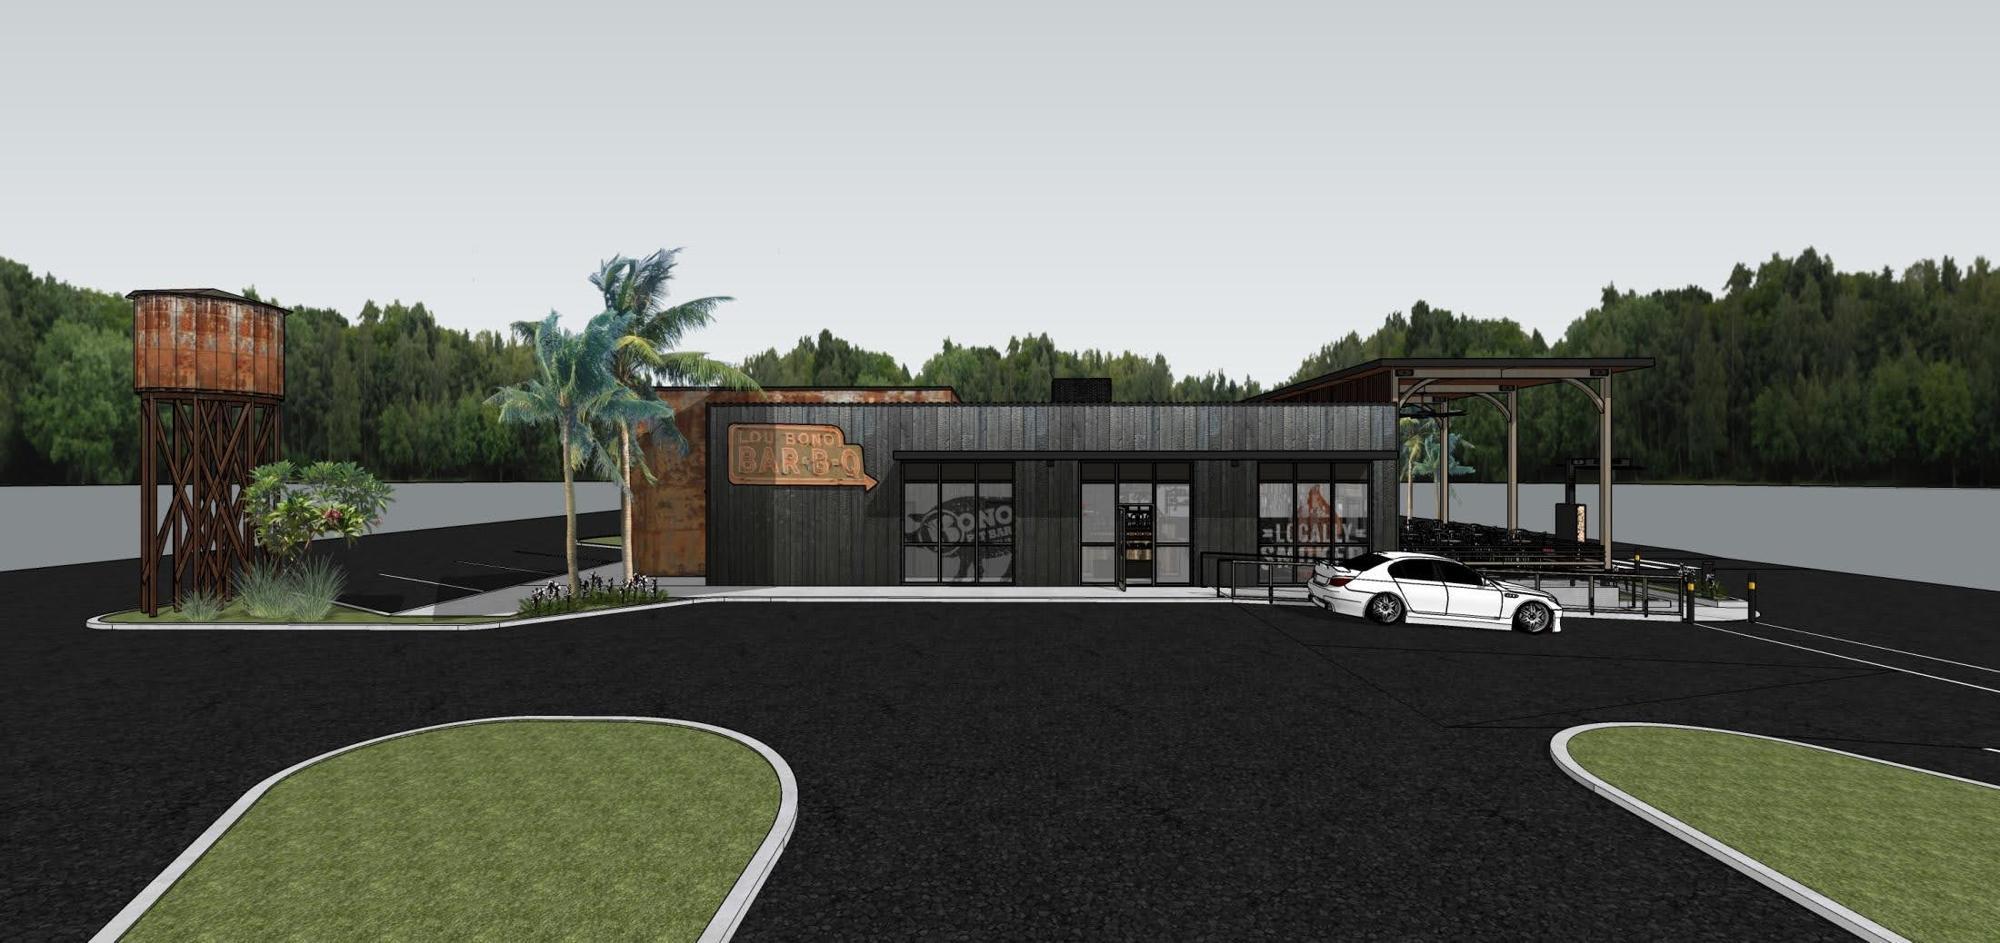 The new Bono's will feature a 1,000-square-foot front porch with dining and seating and a takeout window.